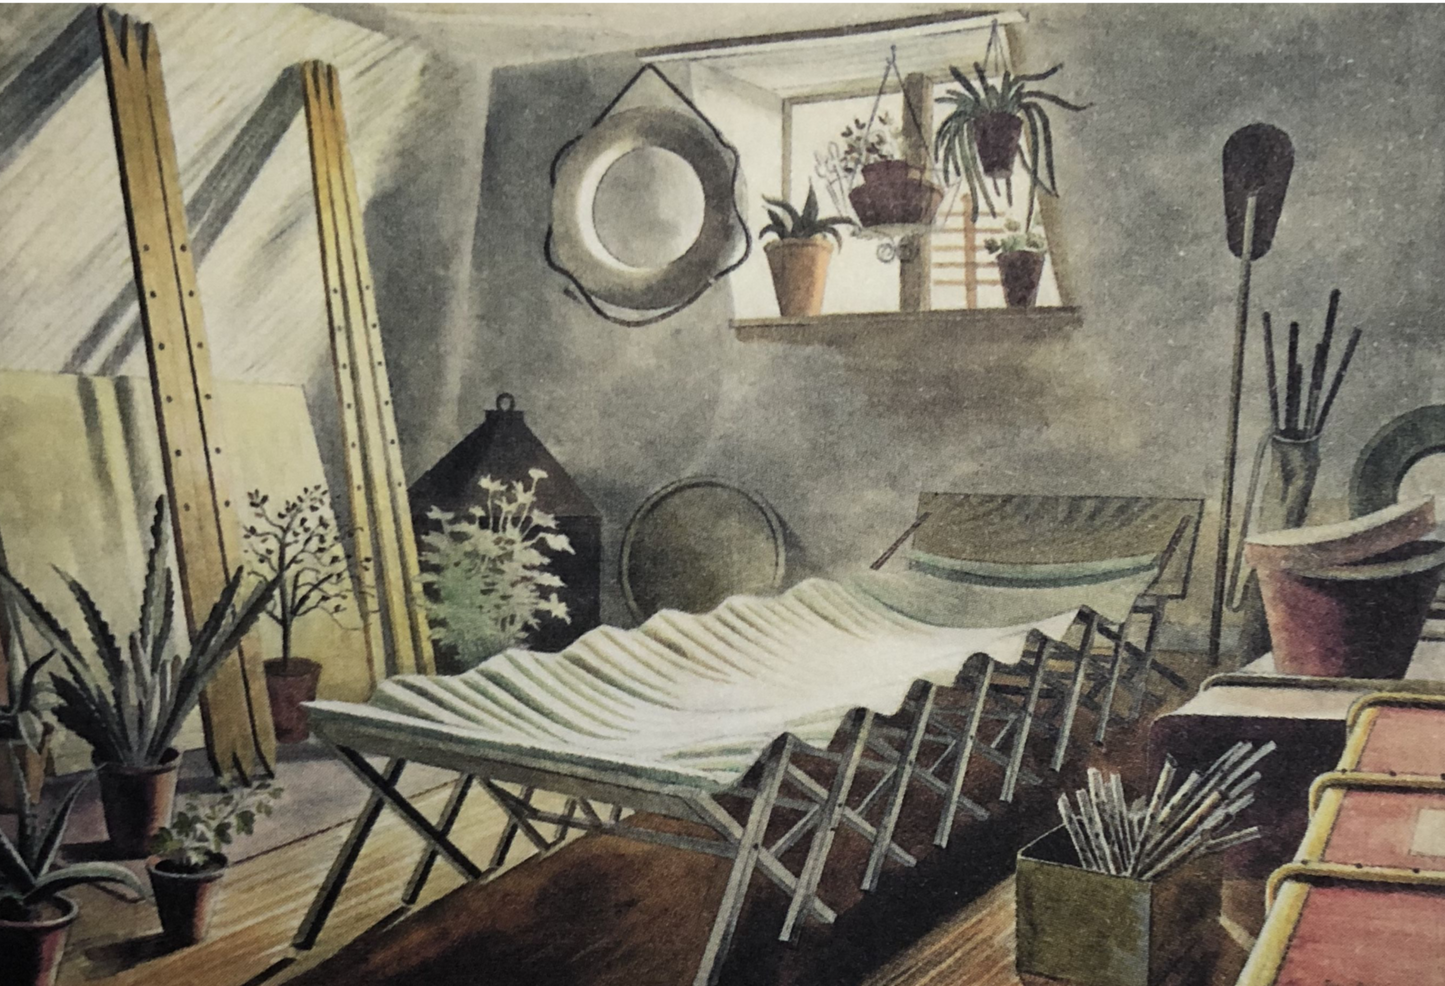 The Attic Room by Eric Ravilious, 1934 - Postcard